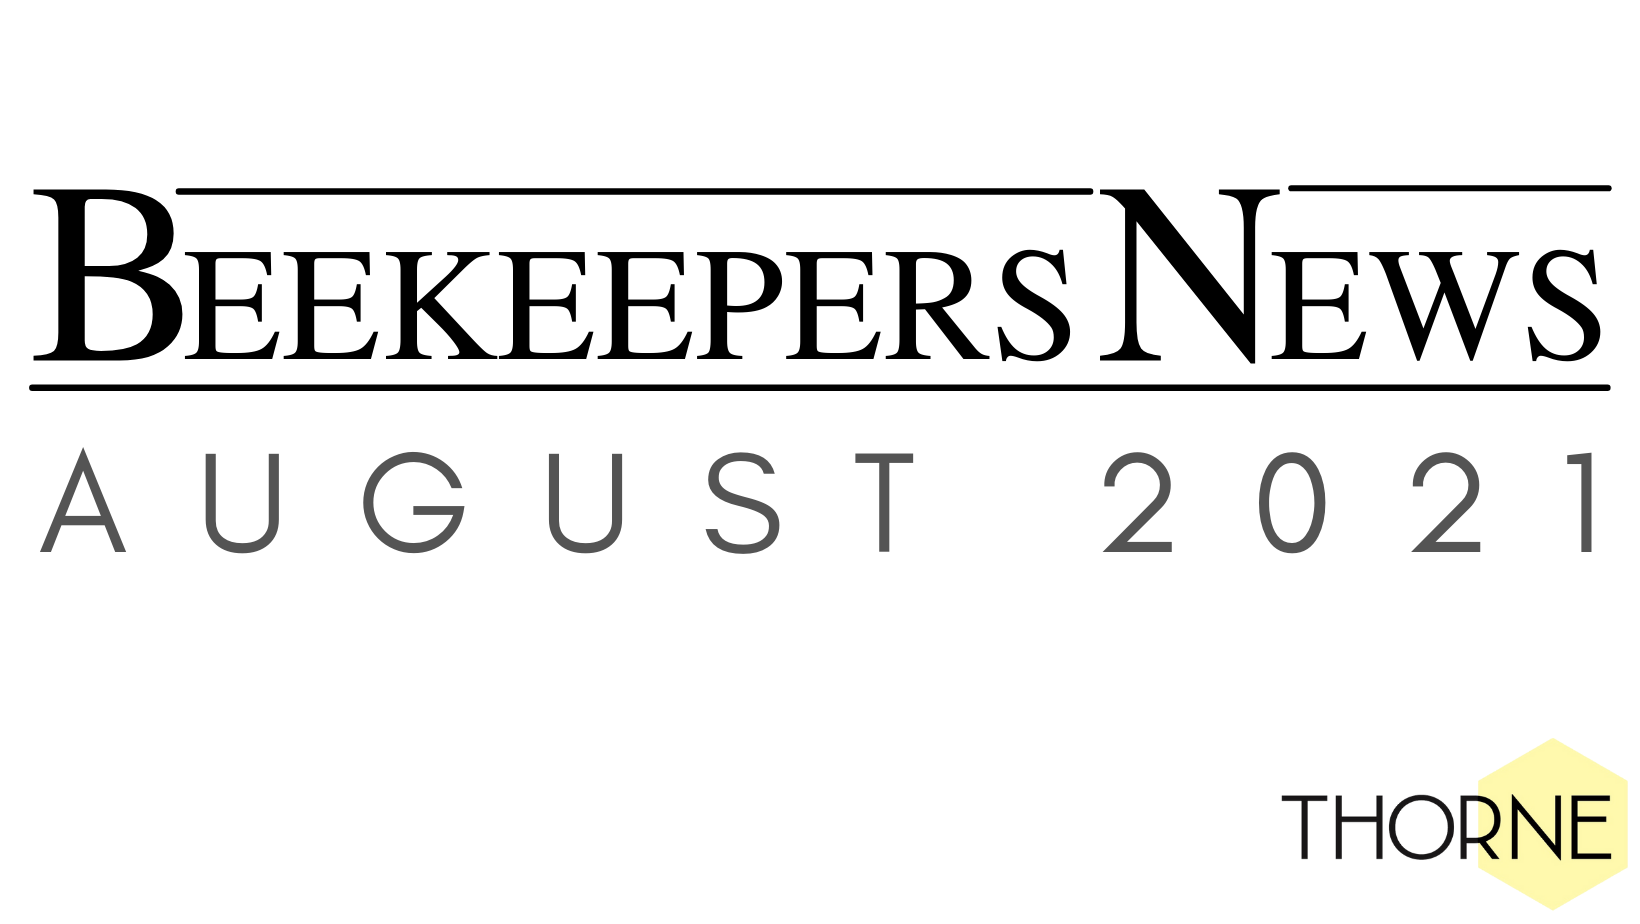 Beekeepers News - August 2021 - Issue 59